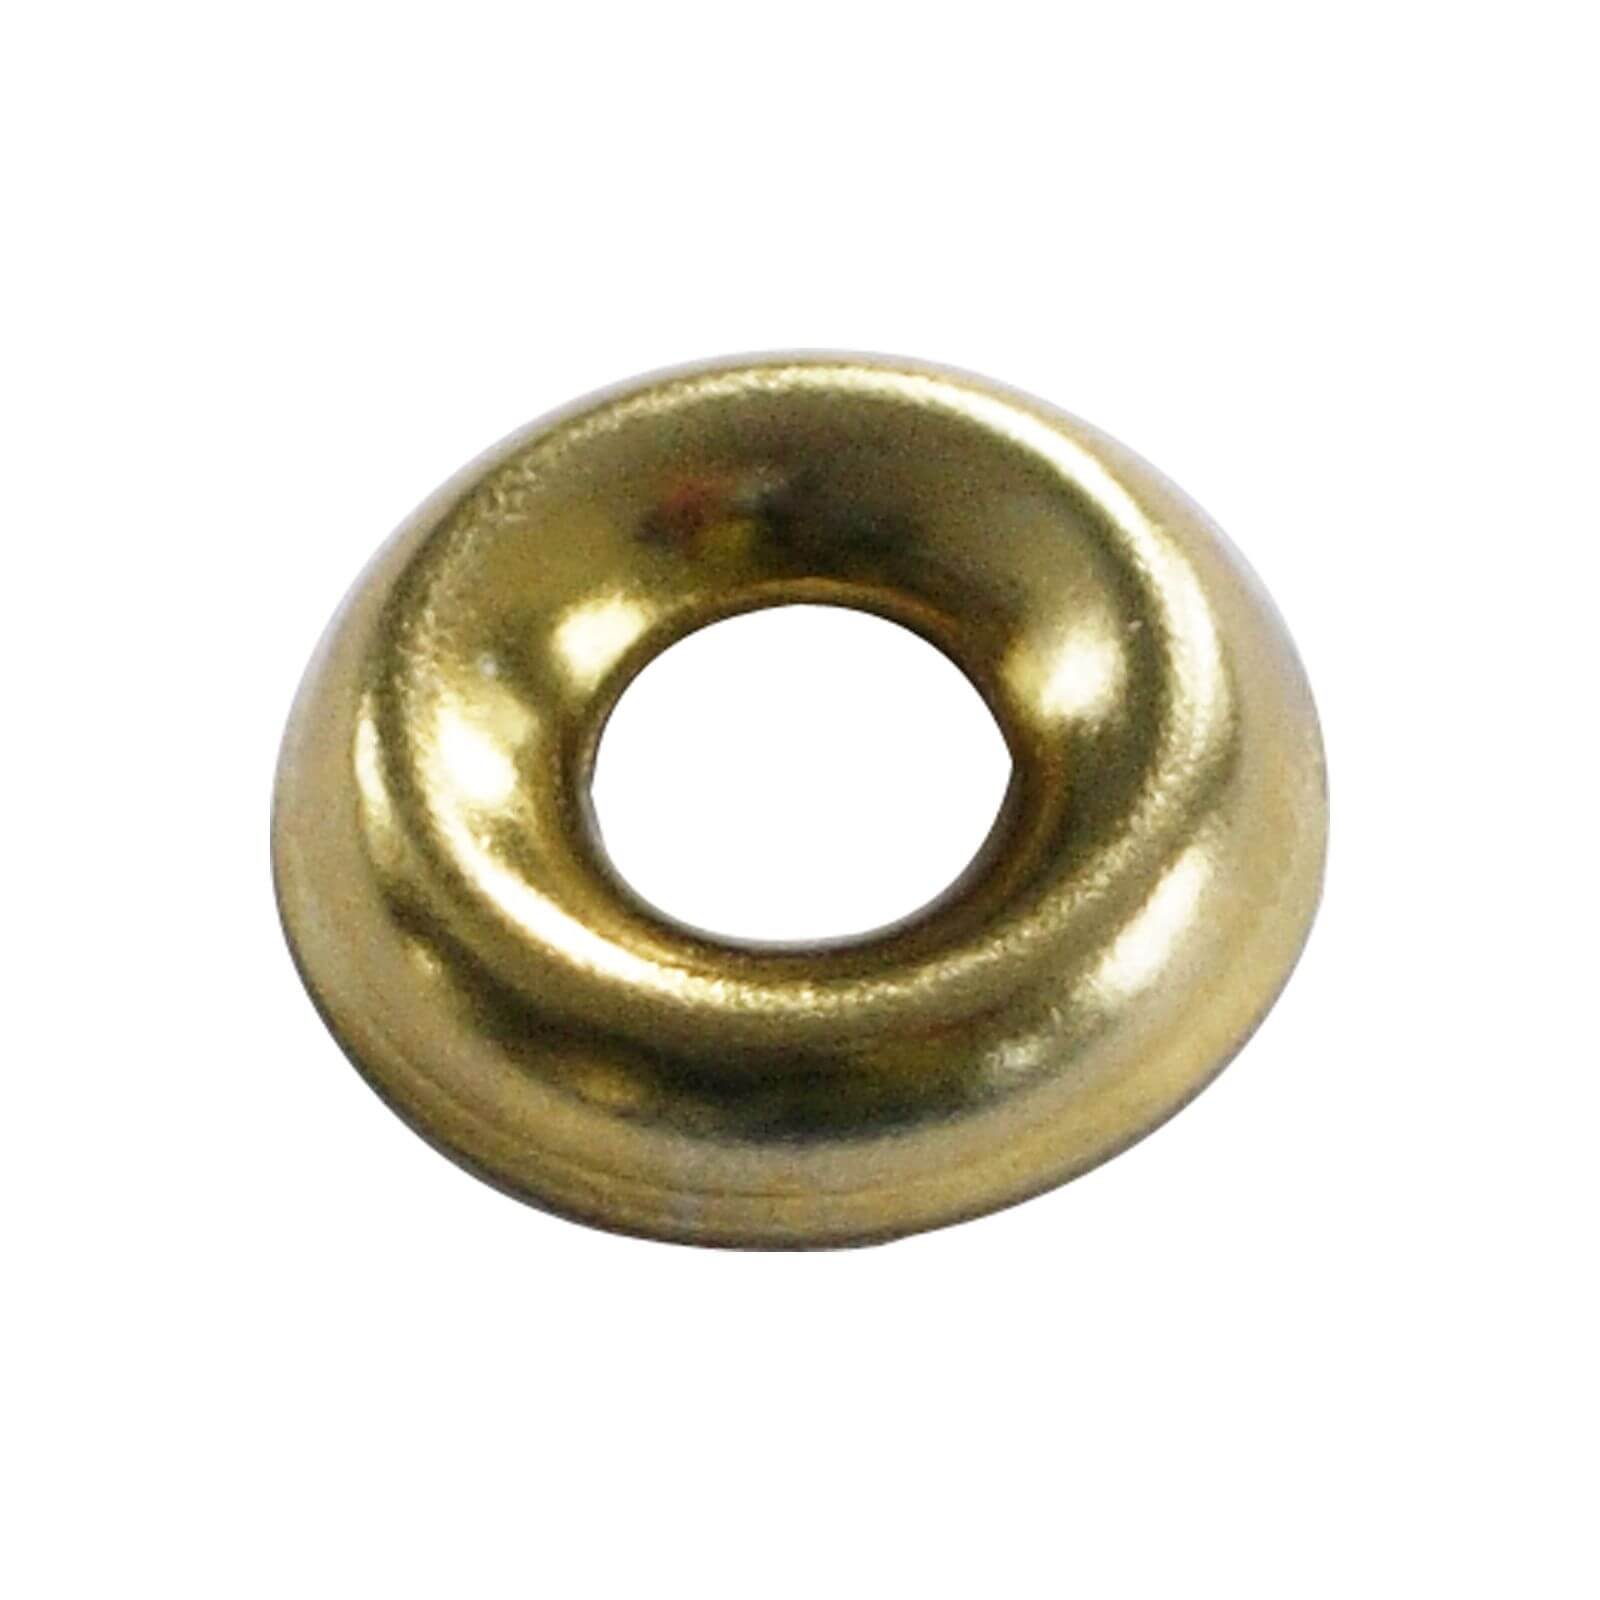 Screw Cup Washer - Brass Plated - 3.5mm - 20 Pack